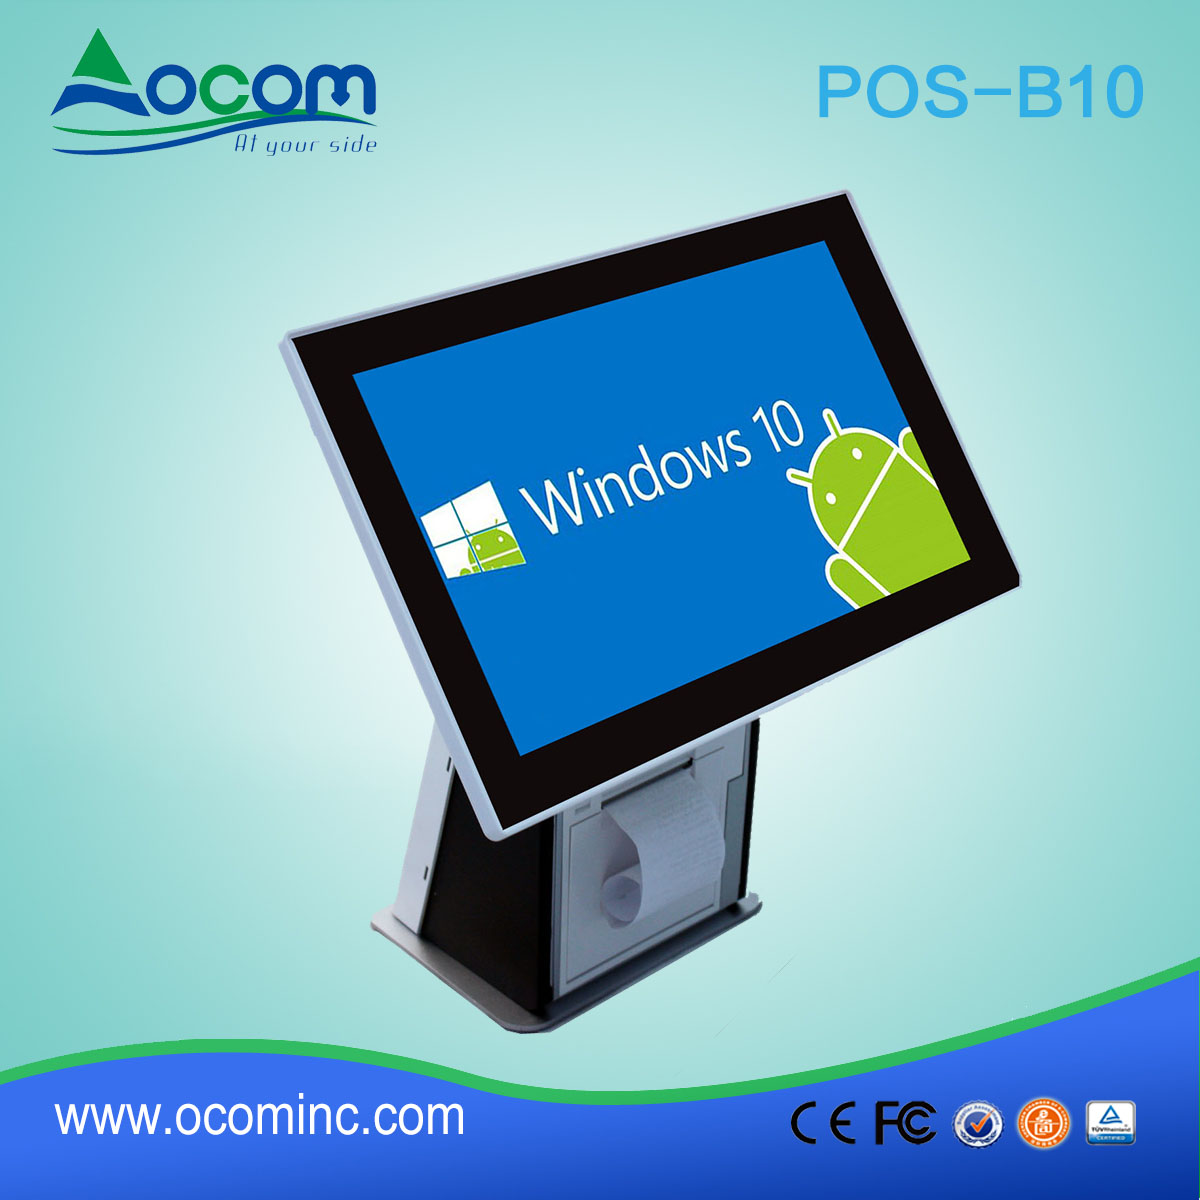 POS-B11.6 11,6 inch touchscreen POS-systeem voor benzinestation